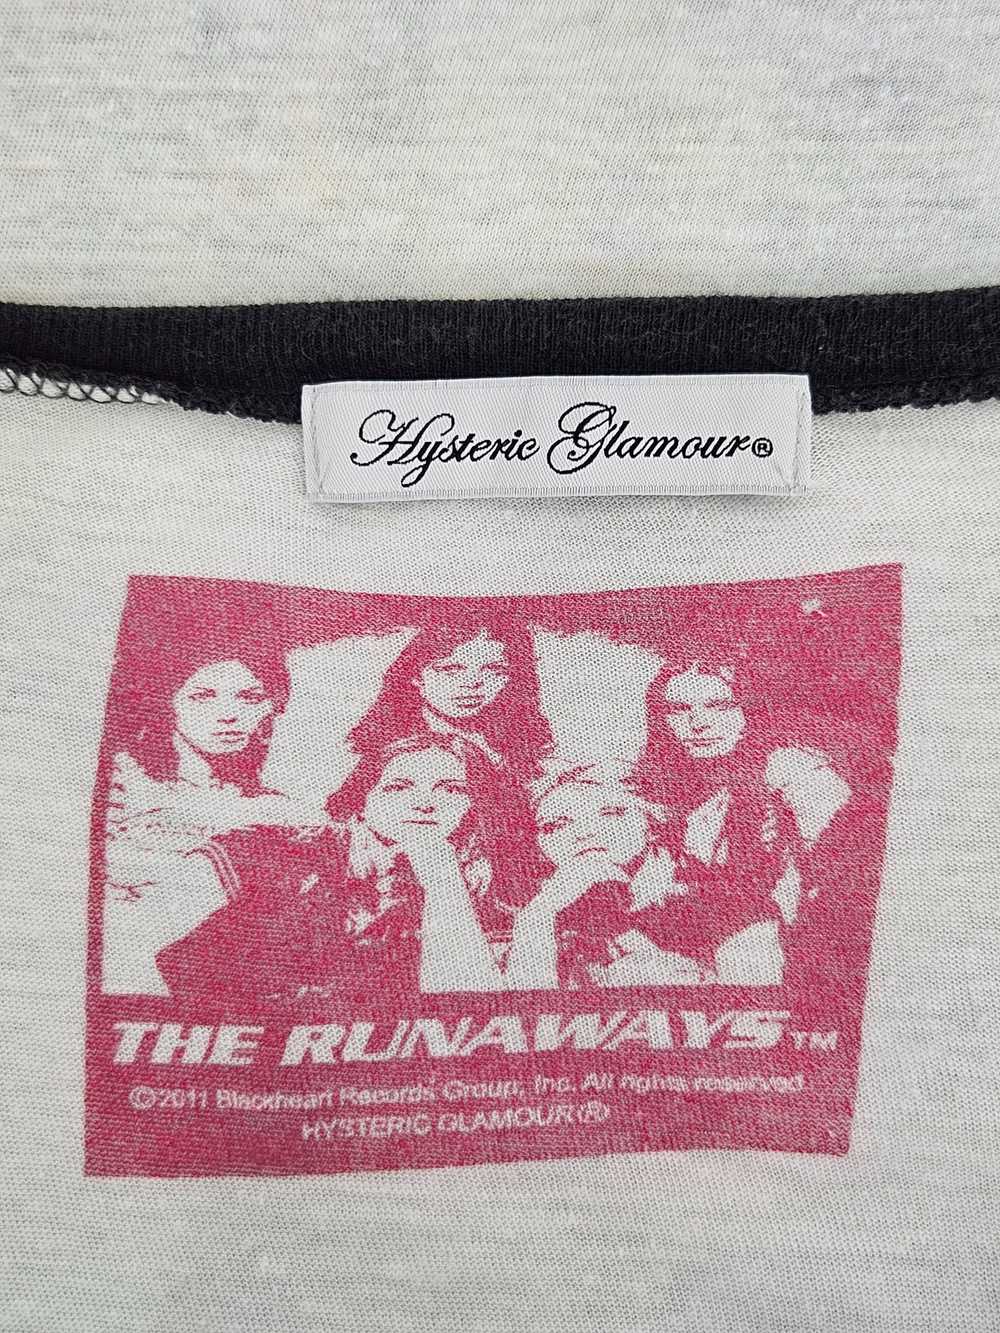 Hysteric Glamour Hysteric Glamour The Runaways Re… - image 4